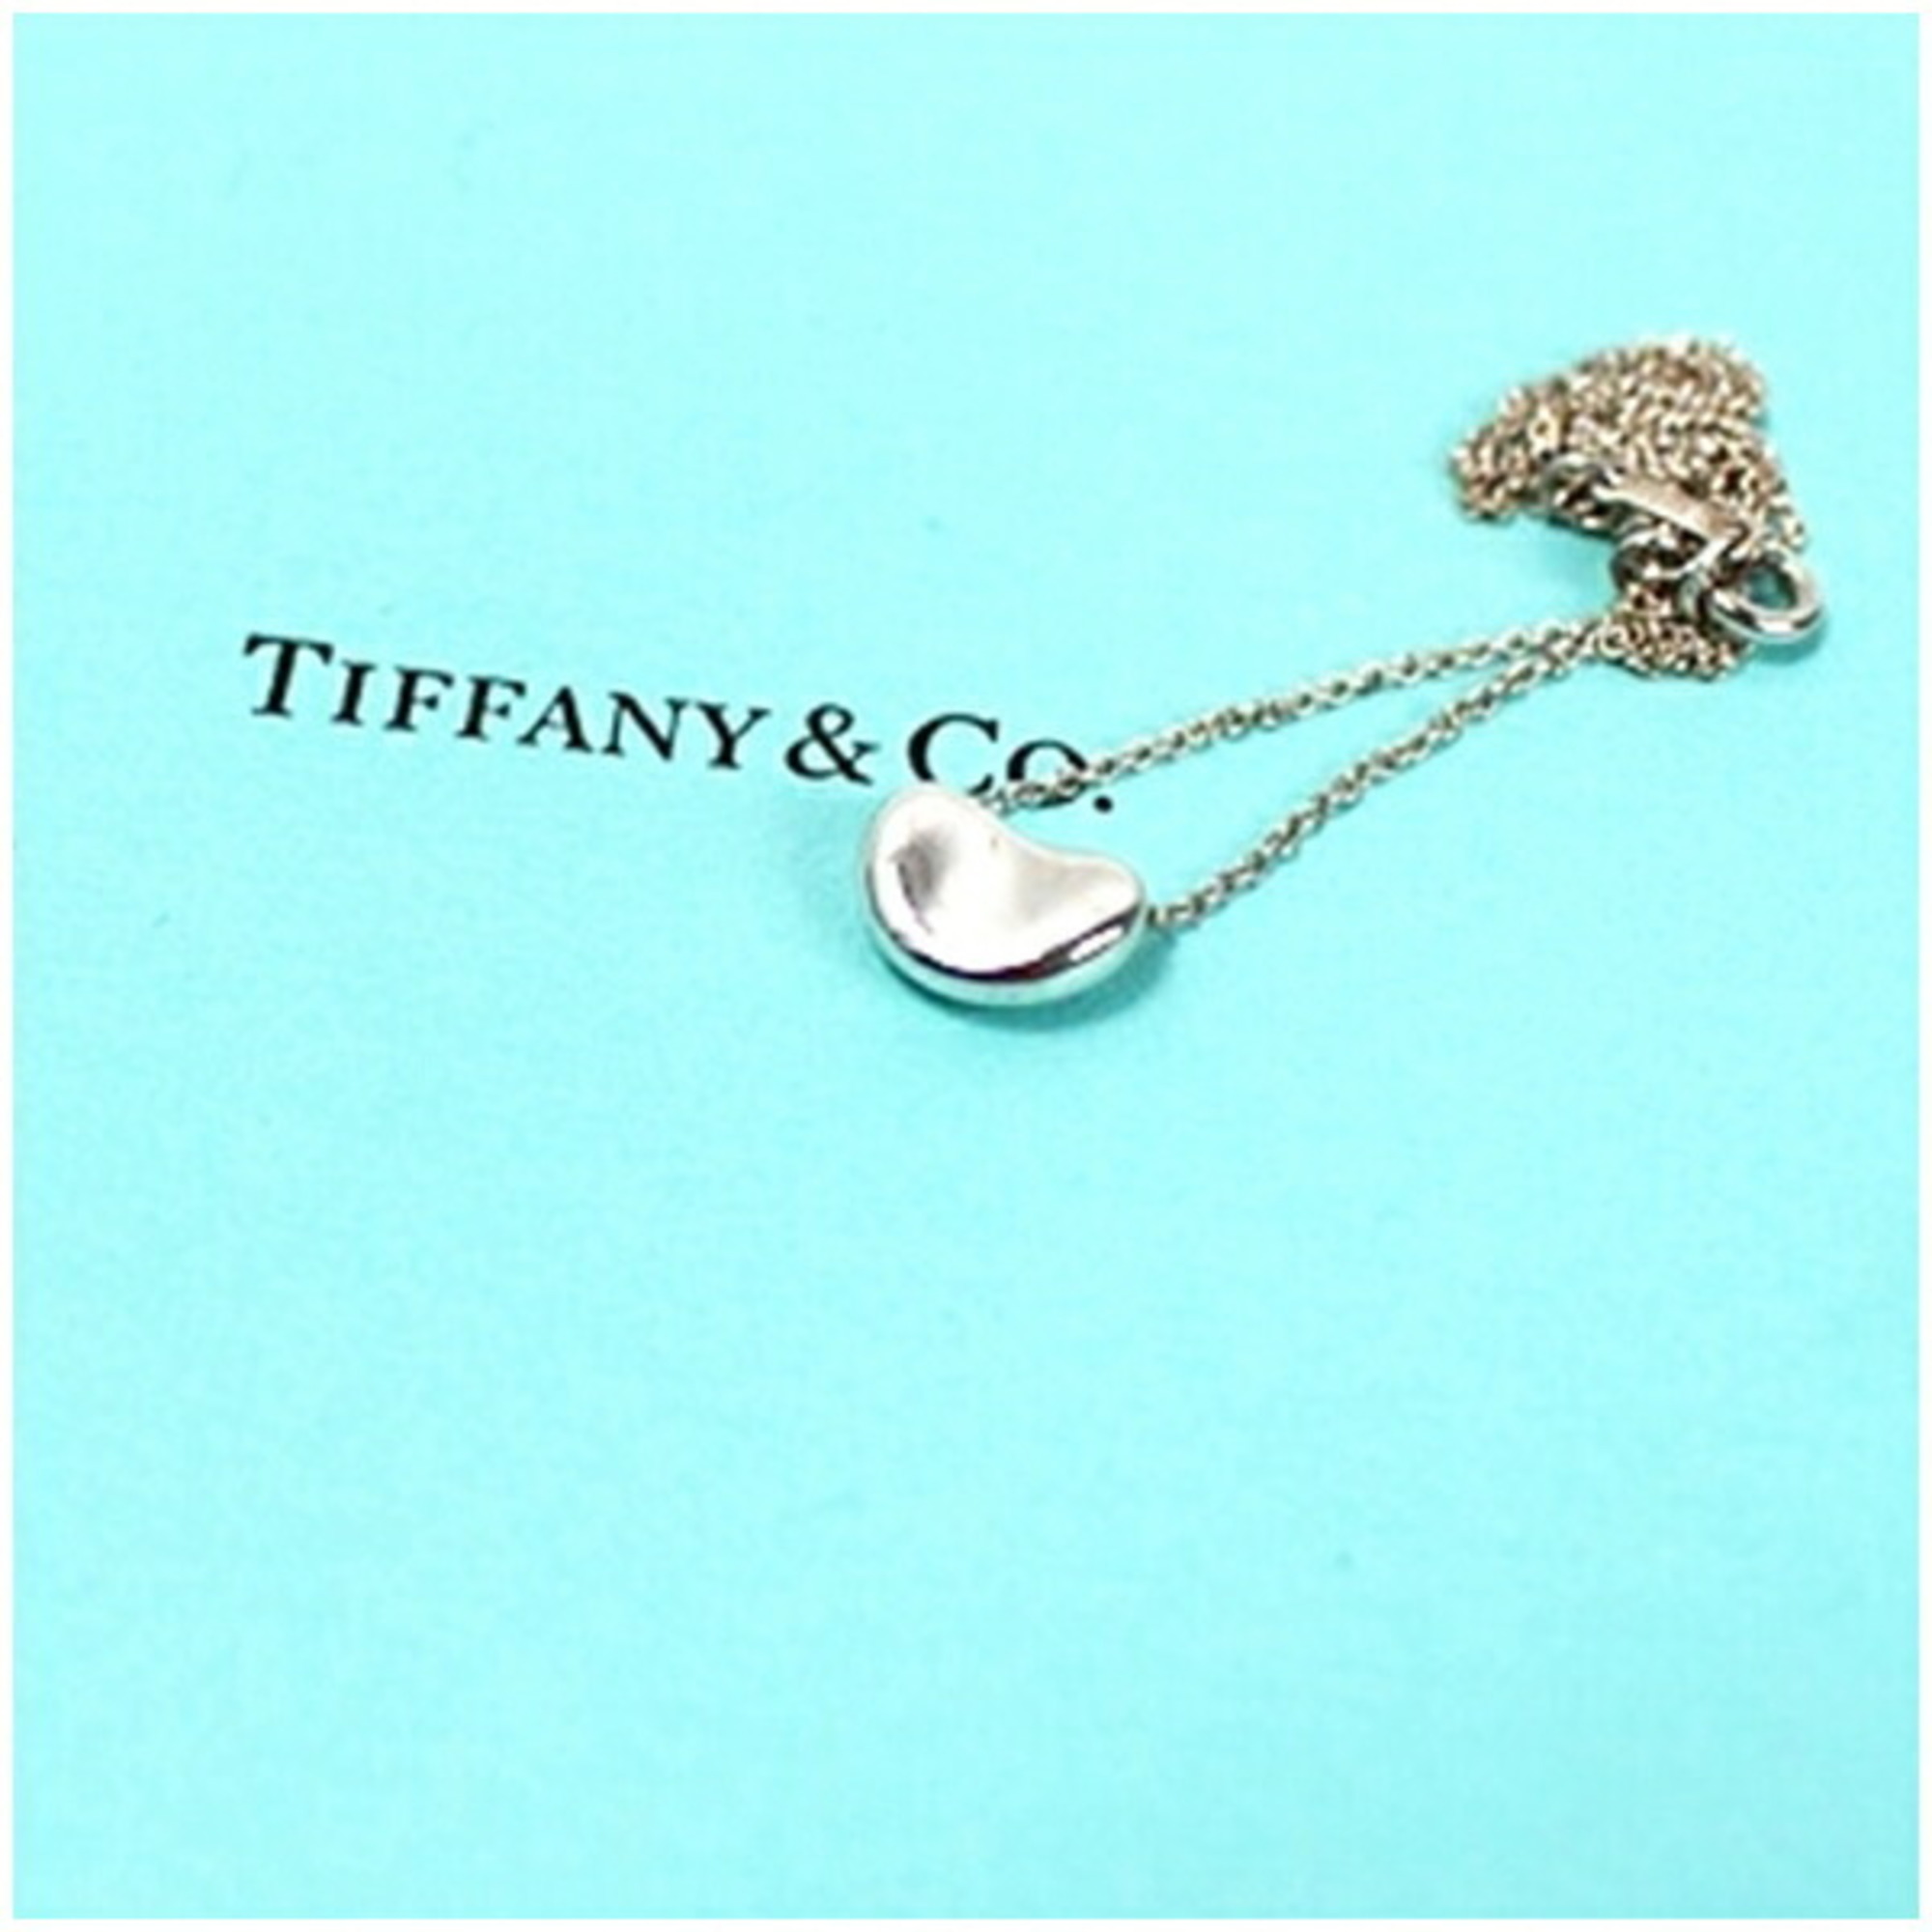 Tiffany Beans Necklace, Silver 925, for TIFFANY&Co, Women's Pendant